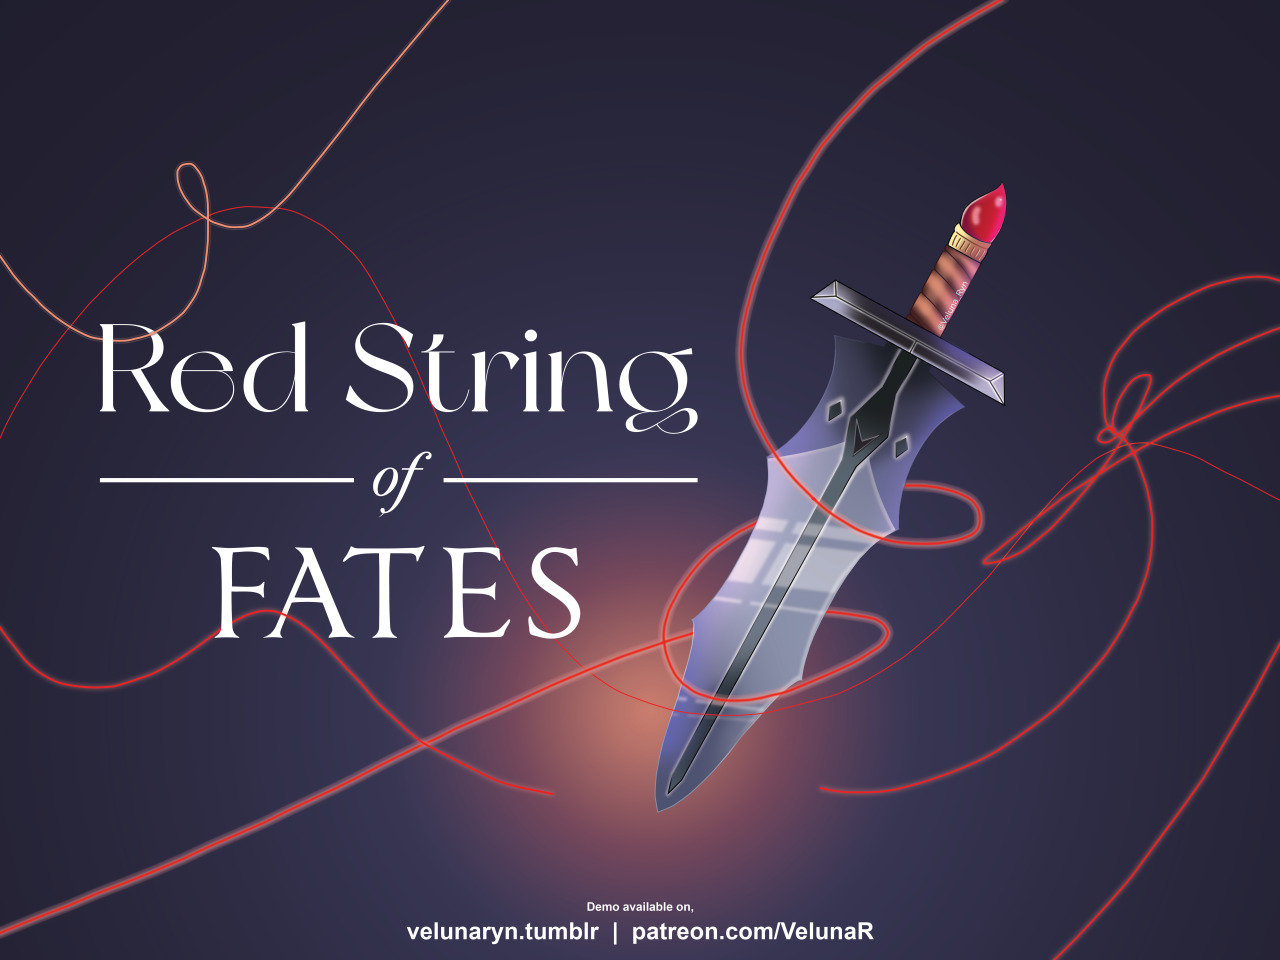 Red String of Fates (RSoF),
the demo of the new upcoming interactive fiction game.
Genre: (Fantasy, Romance, Adventure)
Cover reveal!
SUMMARY :
Play in a world where humans keep blind eyes just like...